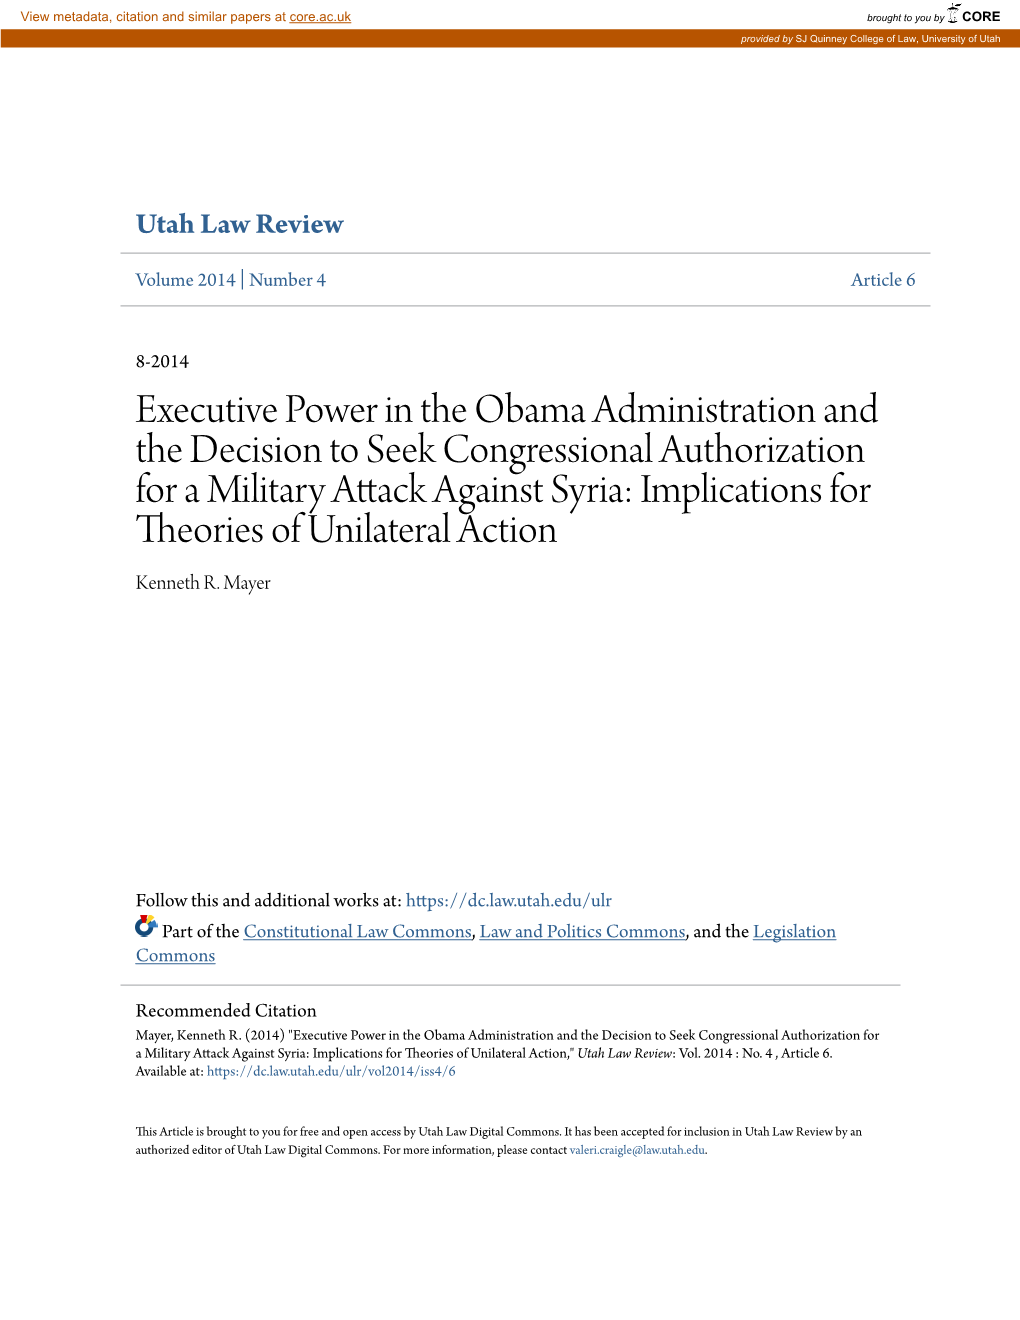 Executive Power in the Obama Administration and the Decision To